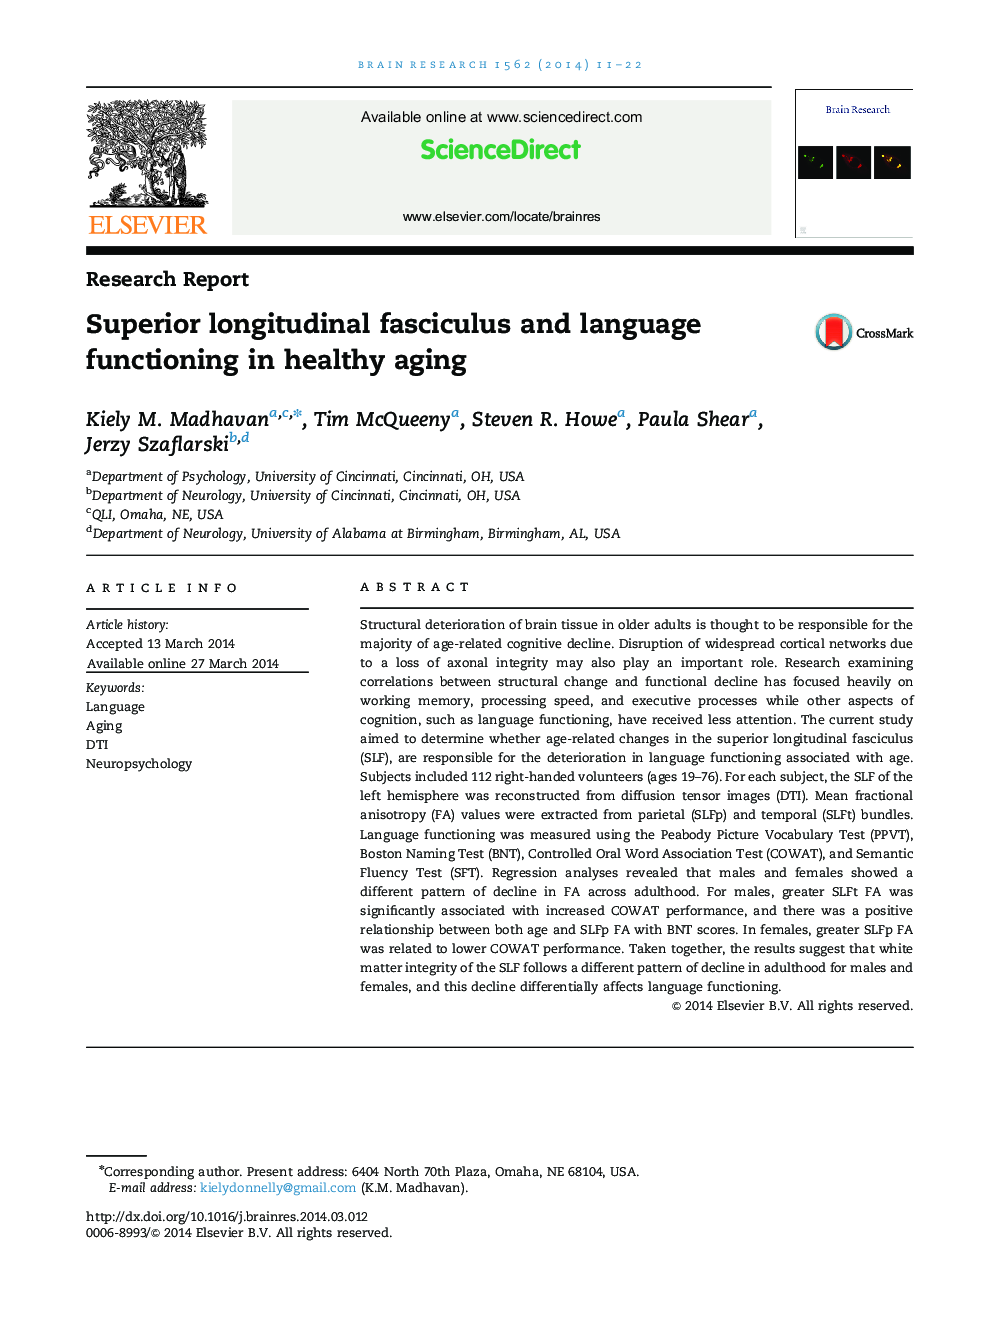 Superior longitudinal fasciculus and language functioning in healthy aging